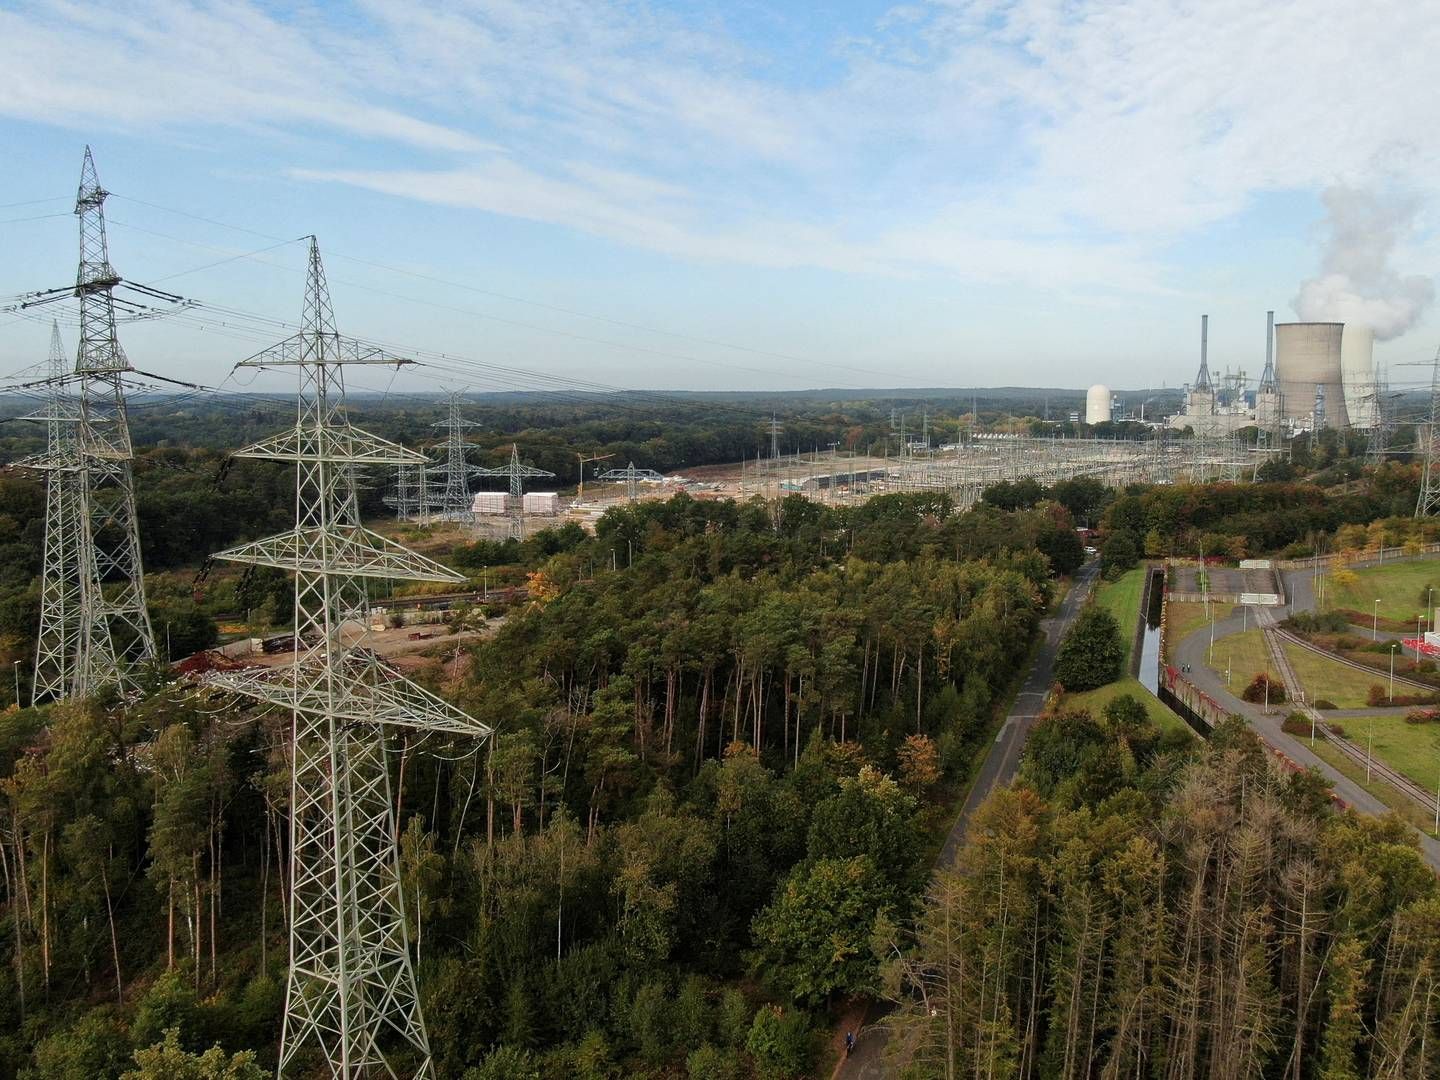 This coming weekend, Bavarian nuclear power plant Isar 2 is disconnected from the country's power grid along with two other plants. And so, Germany bids nuclear power farewell. | Photo: Stephane Nitschke